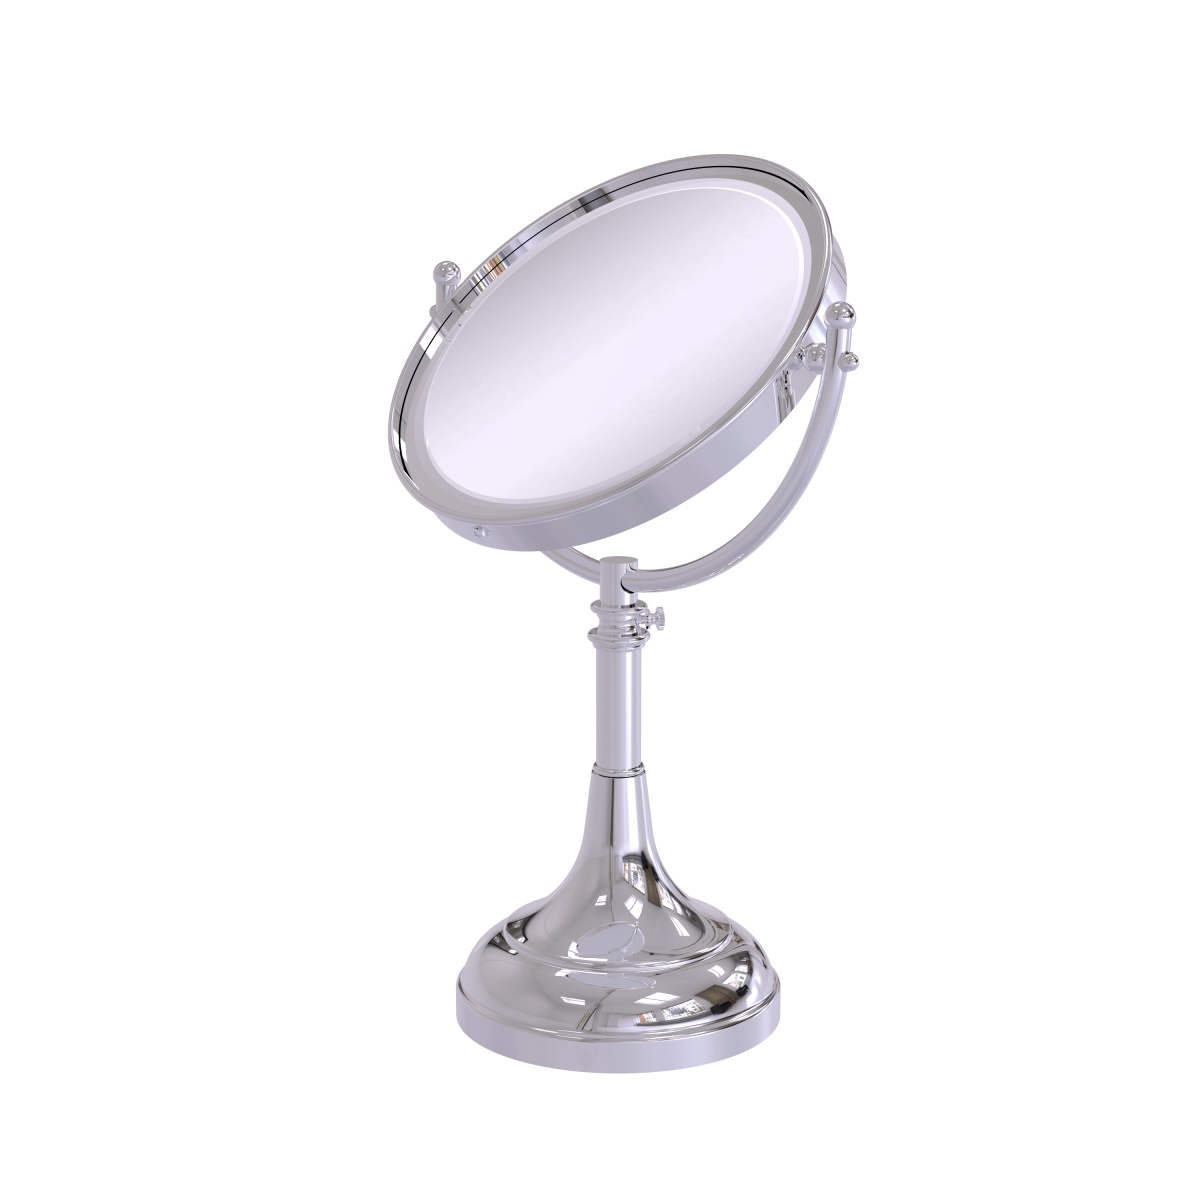 Picture of Allied Brass DM-1-5X-PC 8 in. Height Adjustable Vanity Top Make-Up Mirror 5X Magnification, Polished Chrome